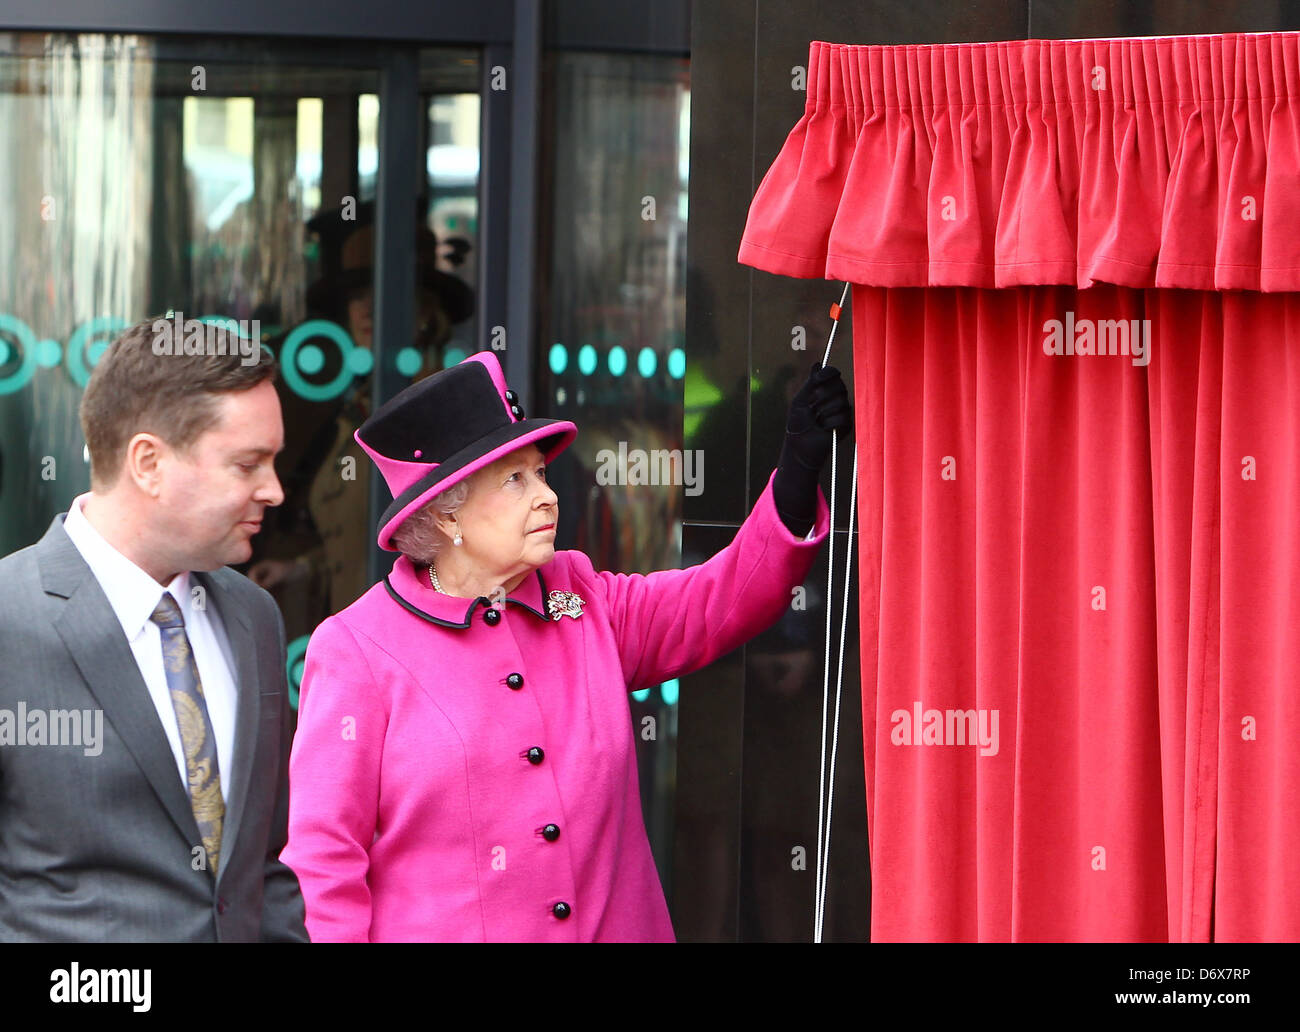 Queen Elizabeth II at De Montfort University during a visit to Leicester for her Diamond Jubilee Leicester, England - 08.03.12 Stock Photo